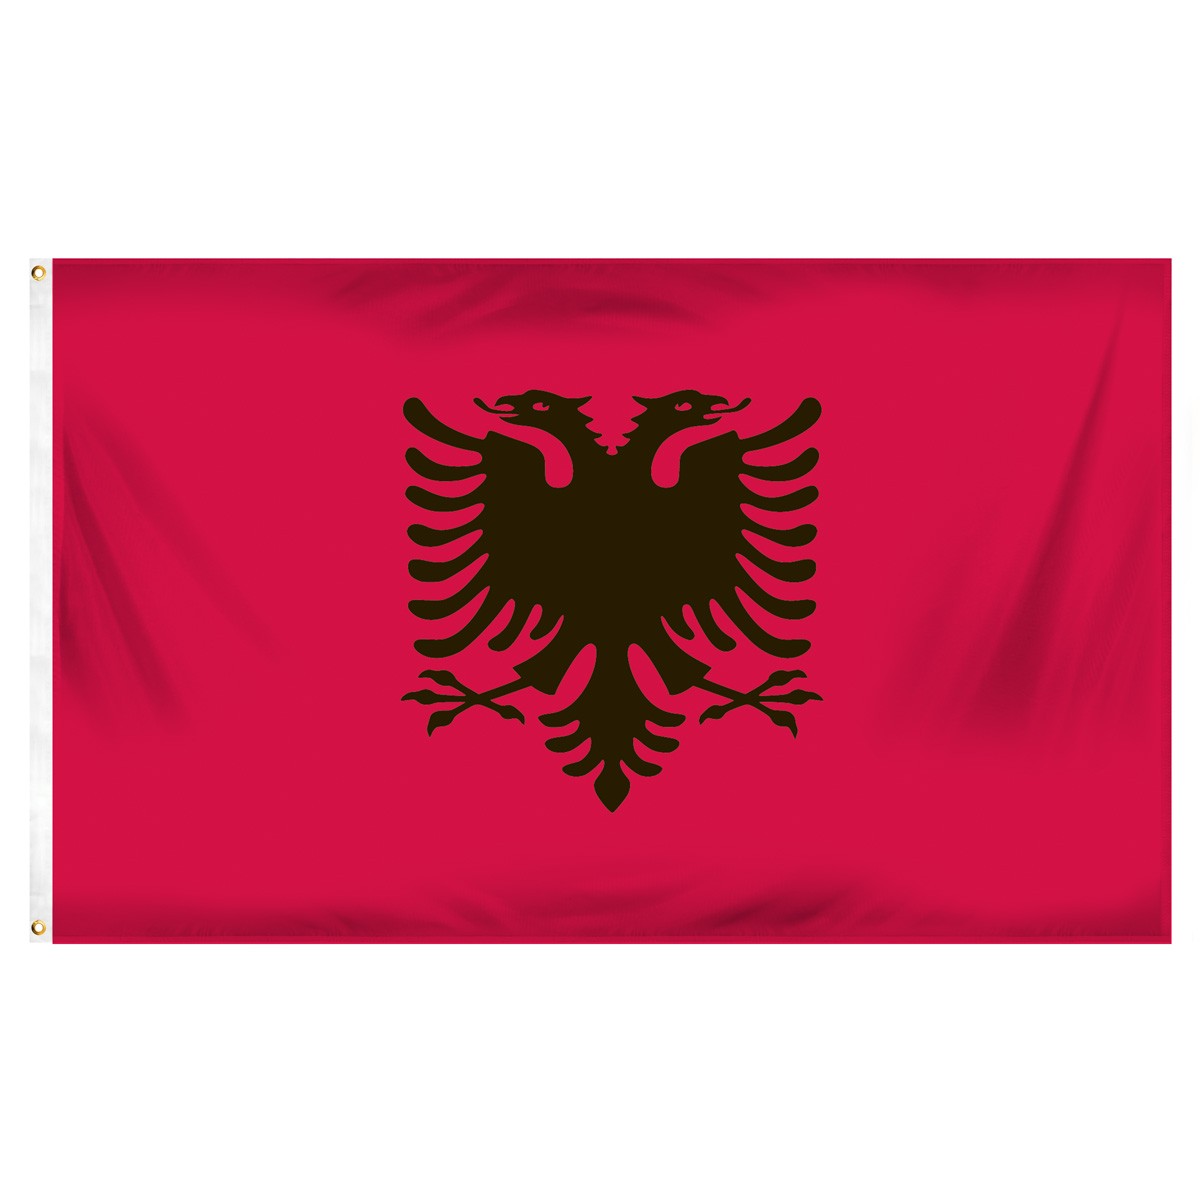 Albania Submit Flags and Flags